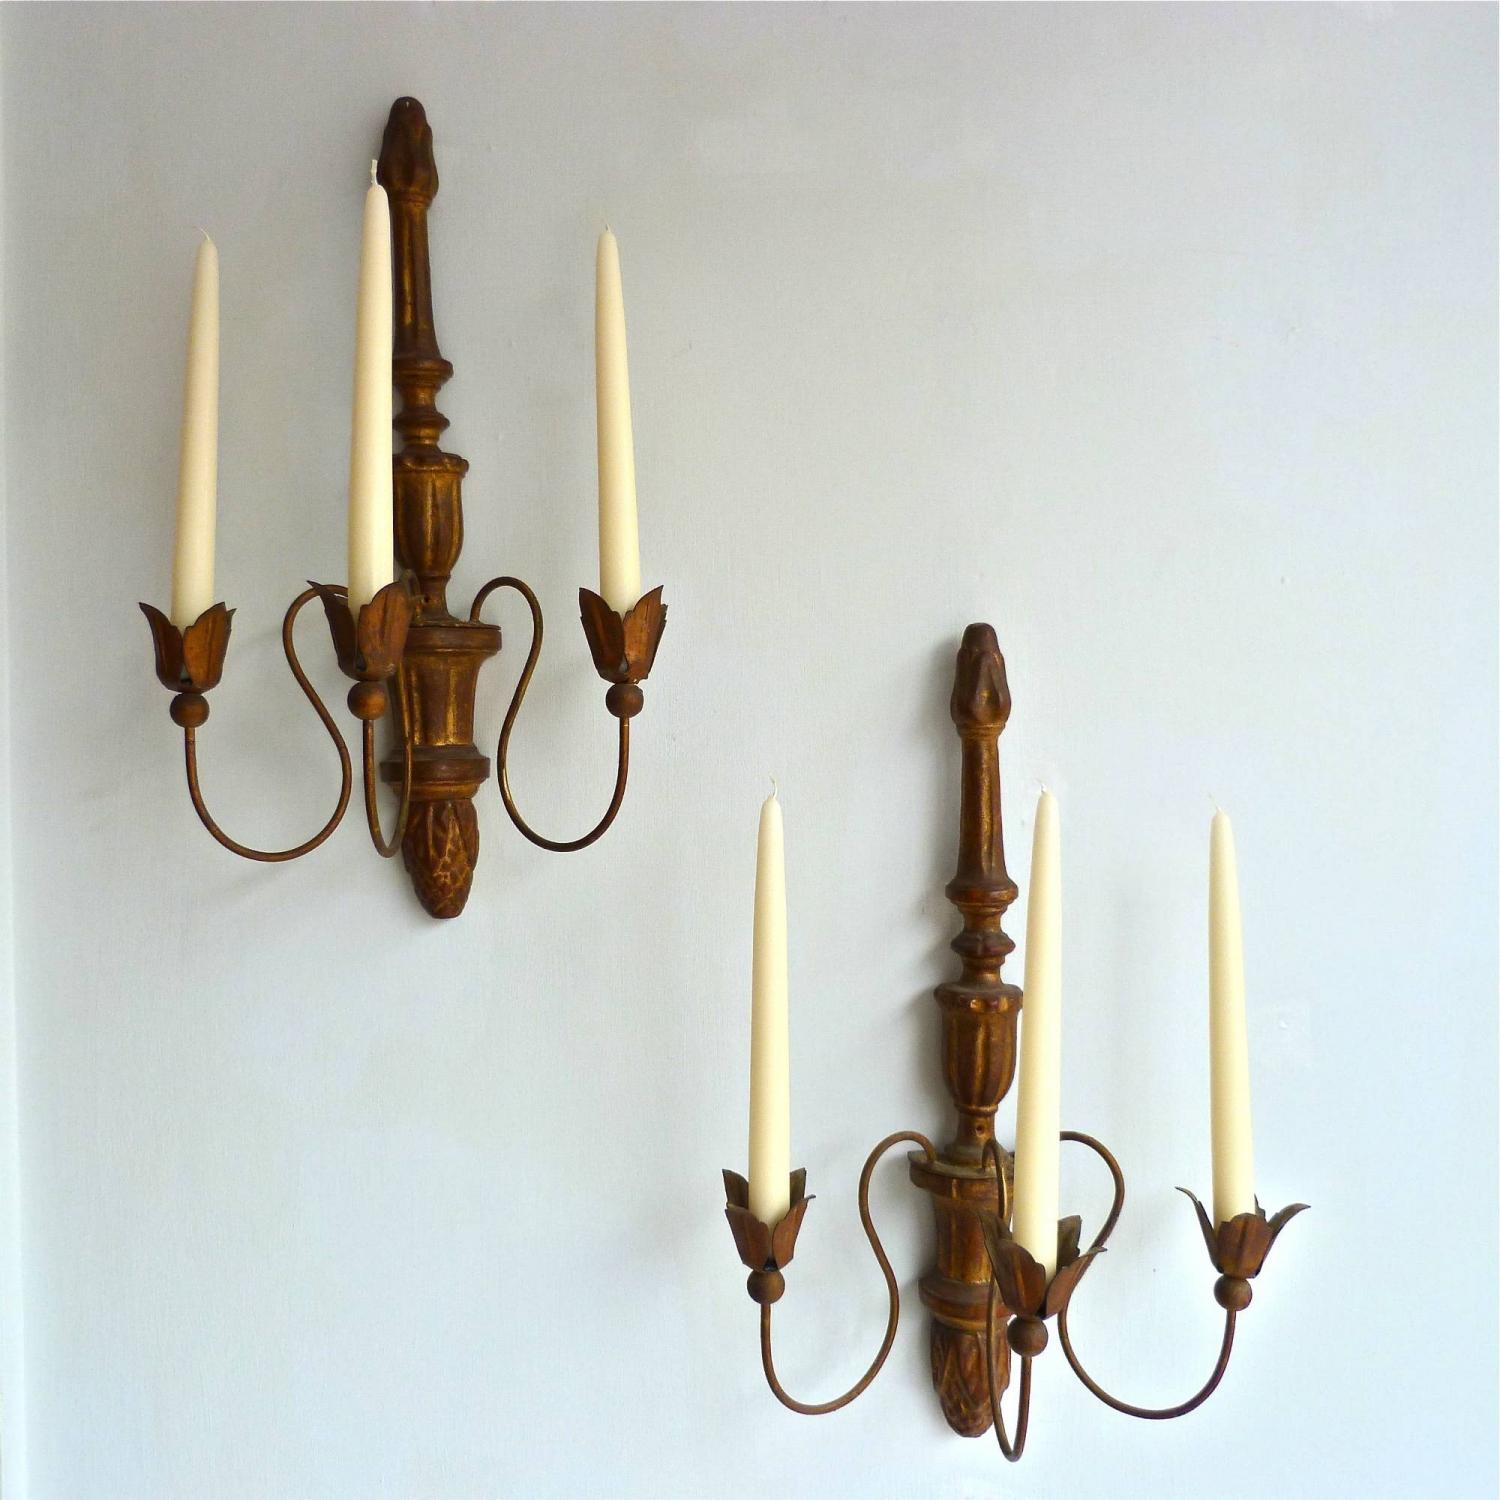 PAIR OF DECORATIVE HAND CARVED WALL SCONCES